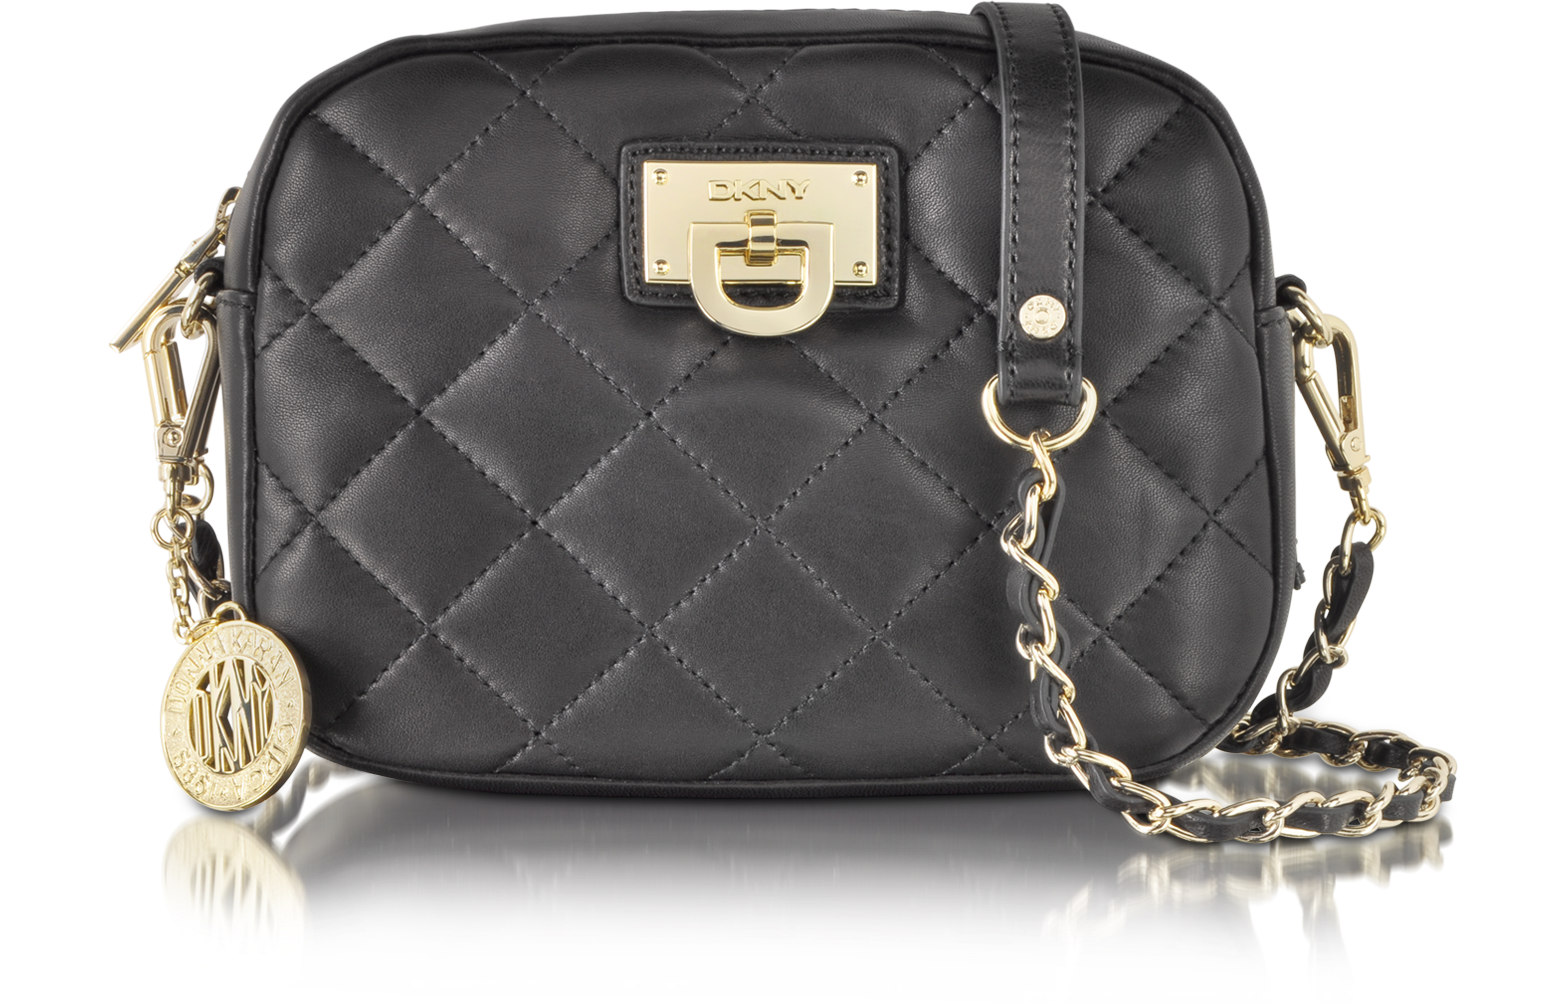 DKNY Black Gansevoort Quilted Nappa Leather Camera Bag at FORZIERI